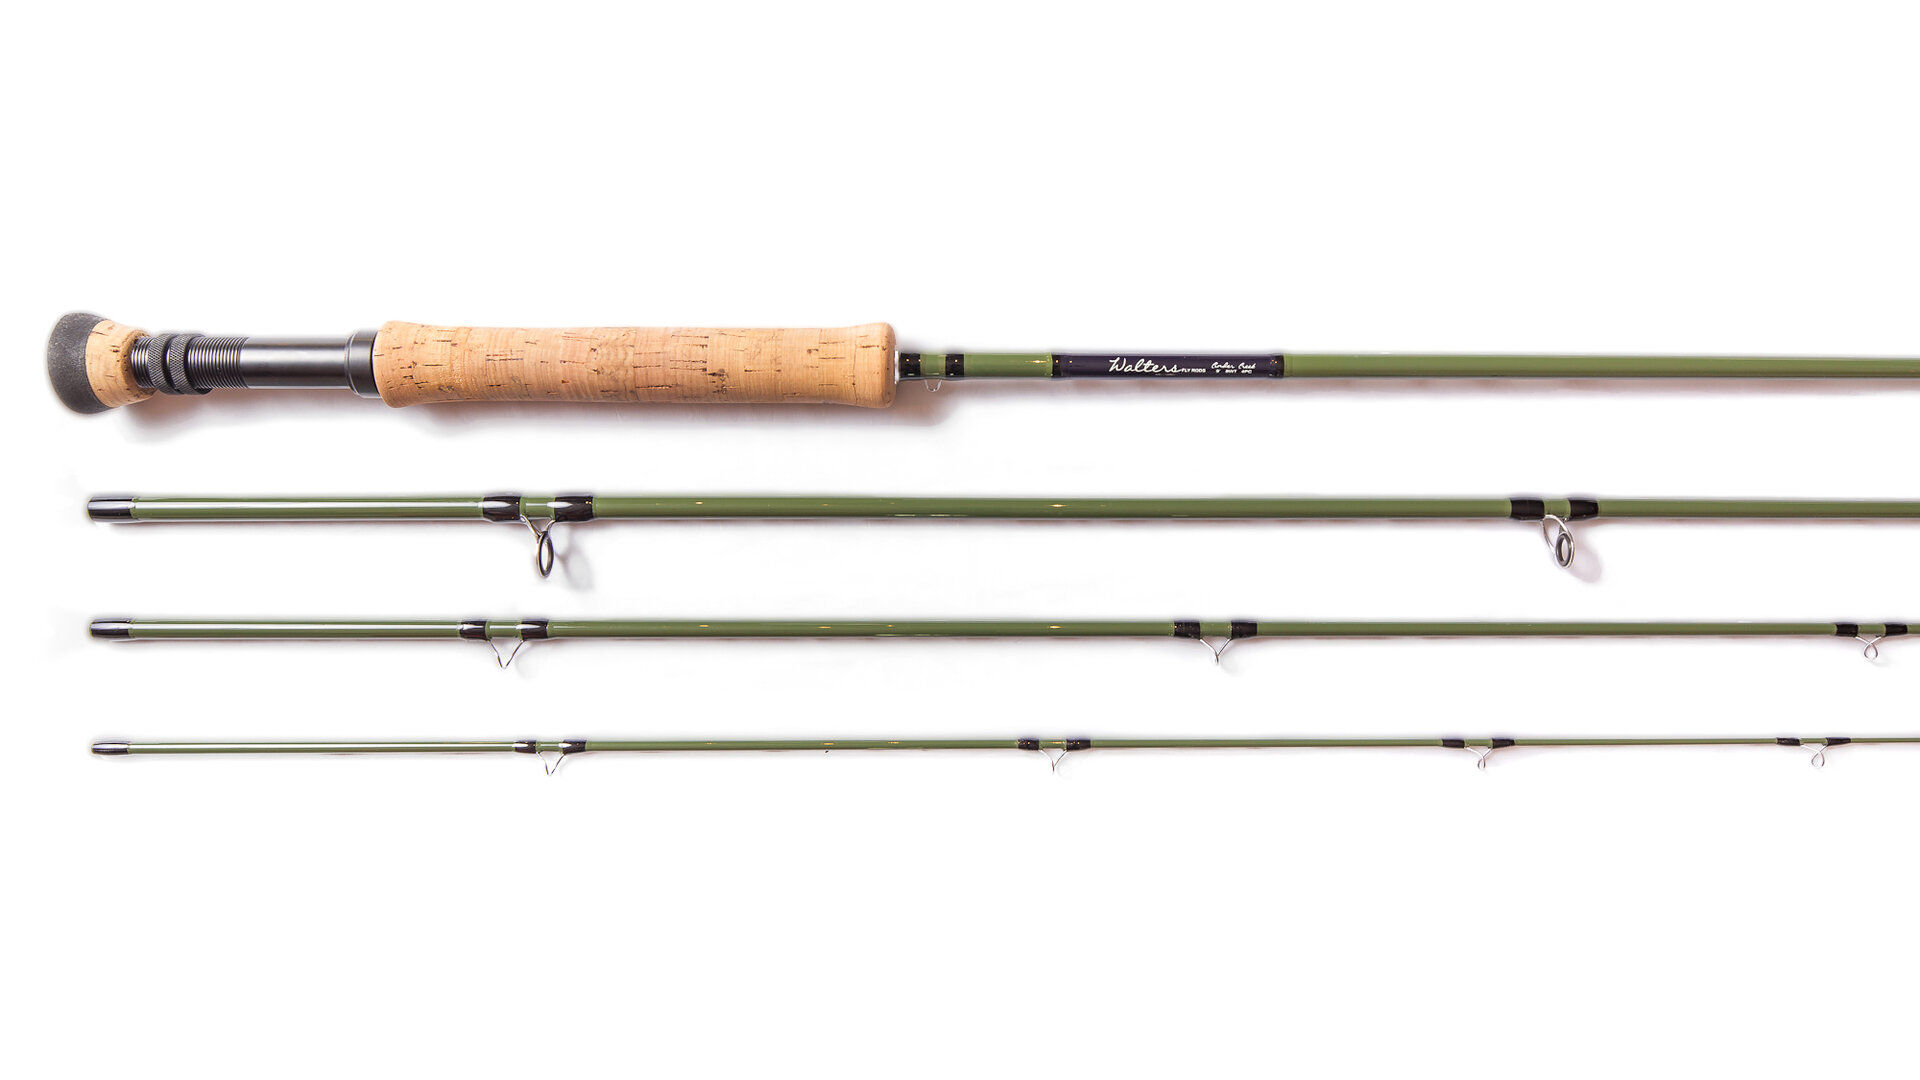 Epic 370 Weight Fastglass Fiberglass Reference Fly Rod, 43% OFF